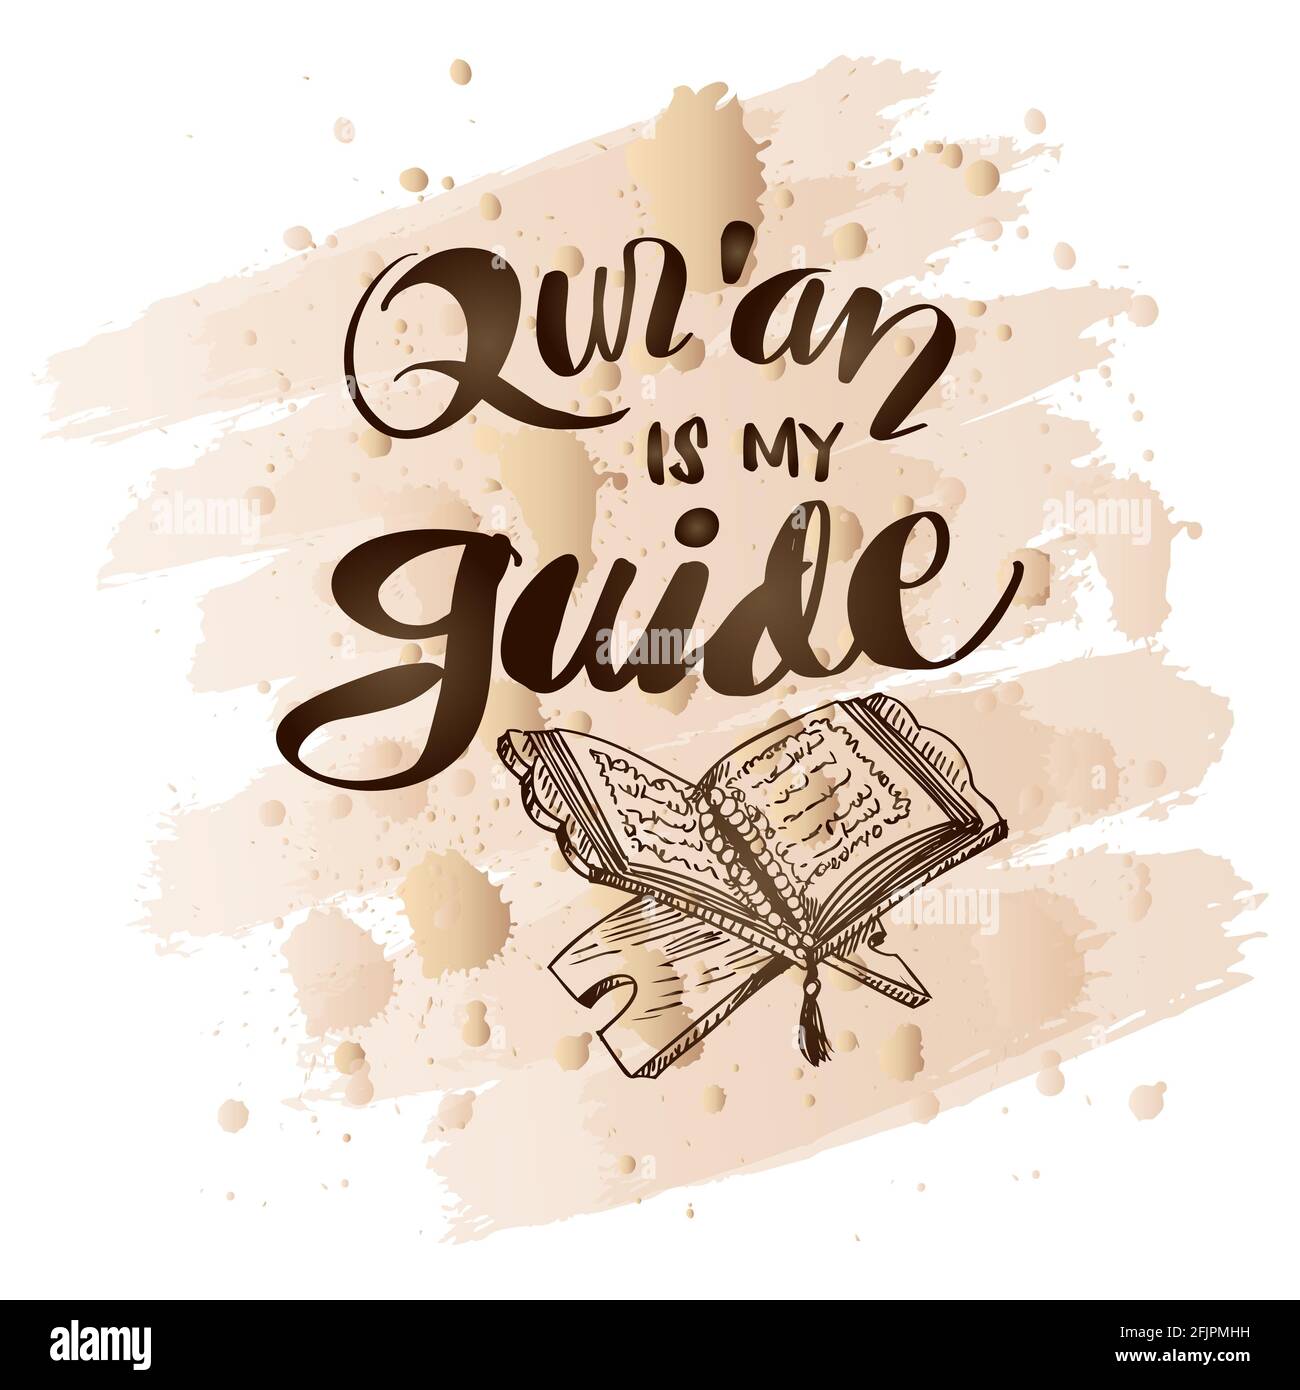 Quran is my guide, hand lettering Islamic quote. Stock Photo